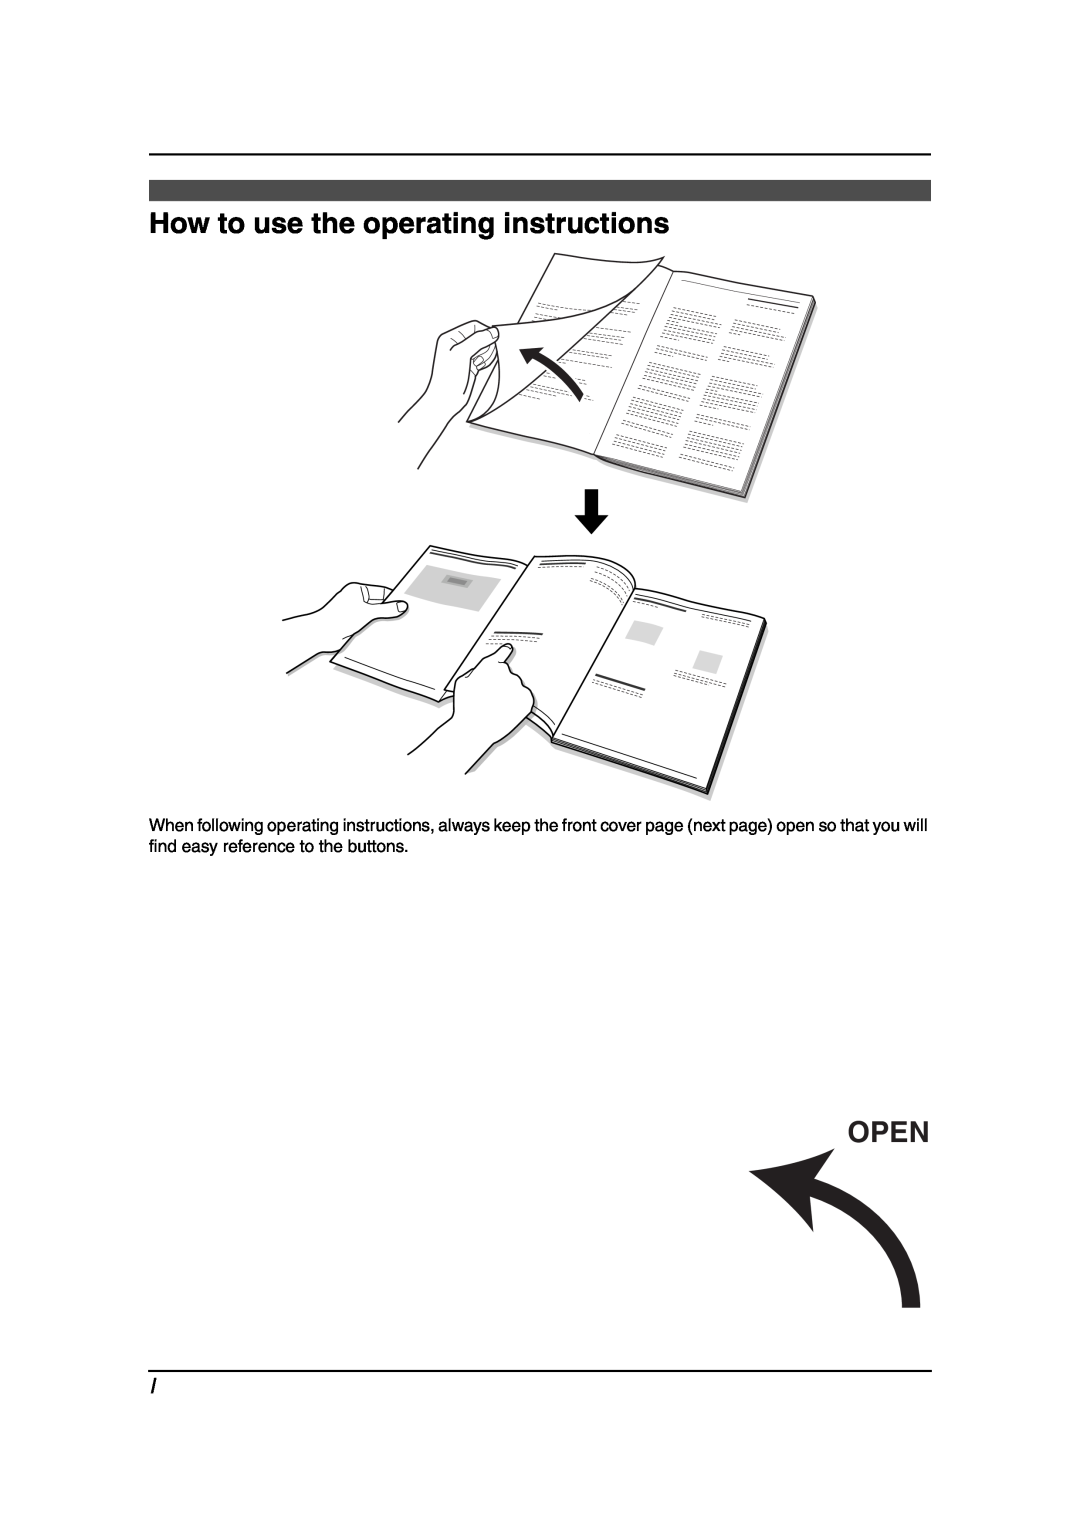 Panasonic KX-FPG376, KX-FPG377 manual How to use the operating instructions, Open 